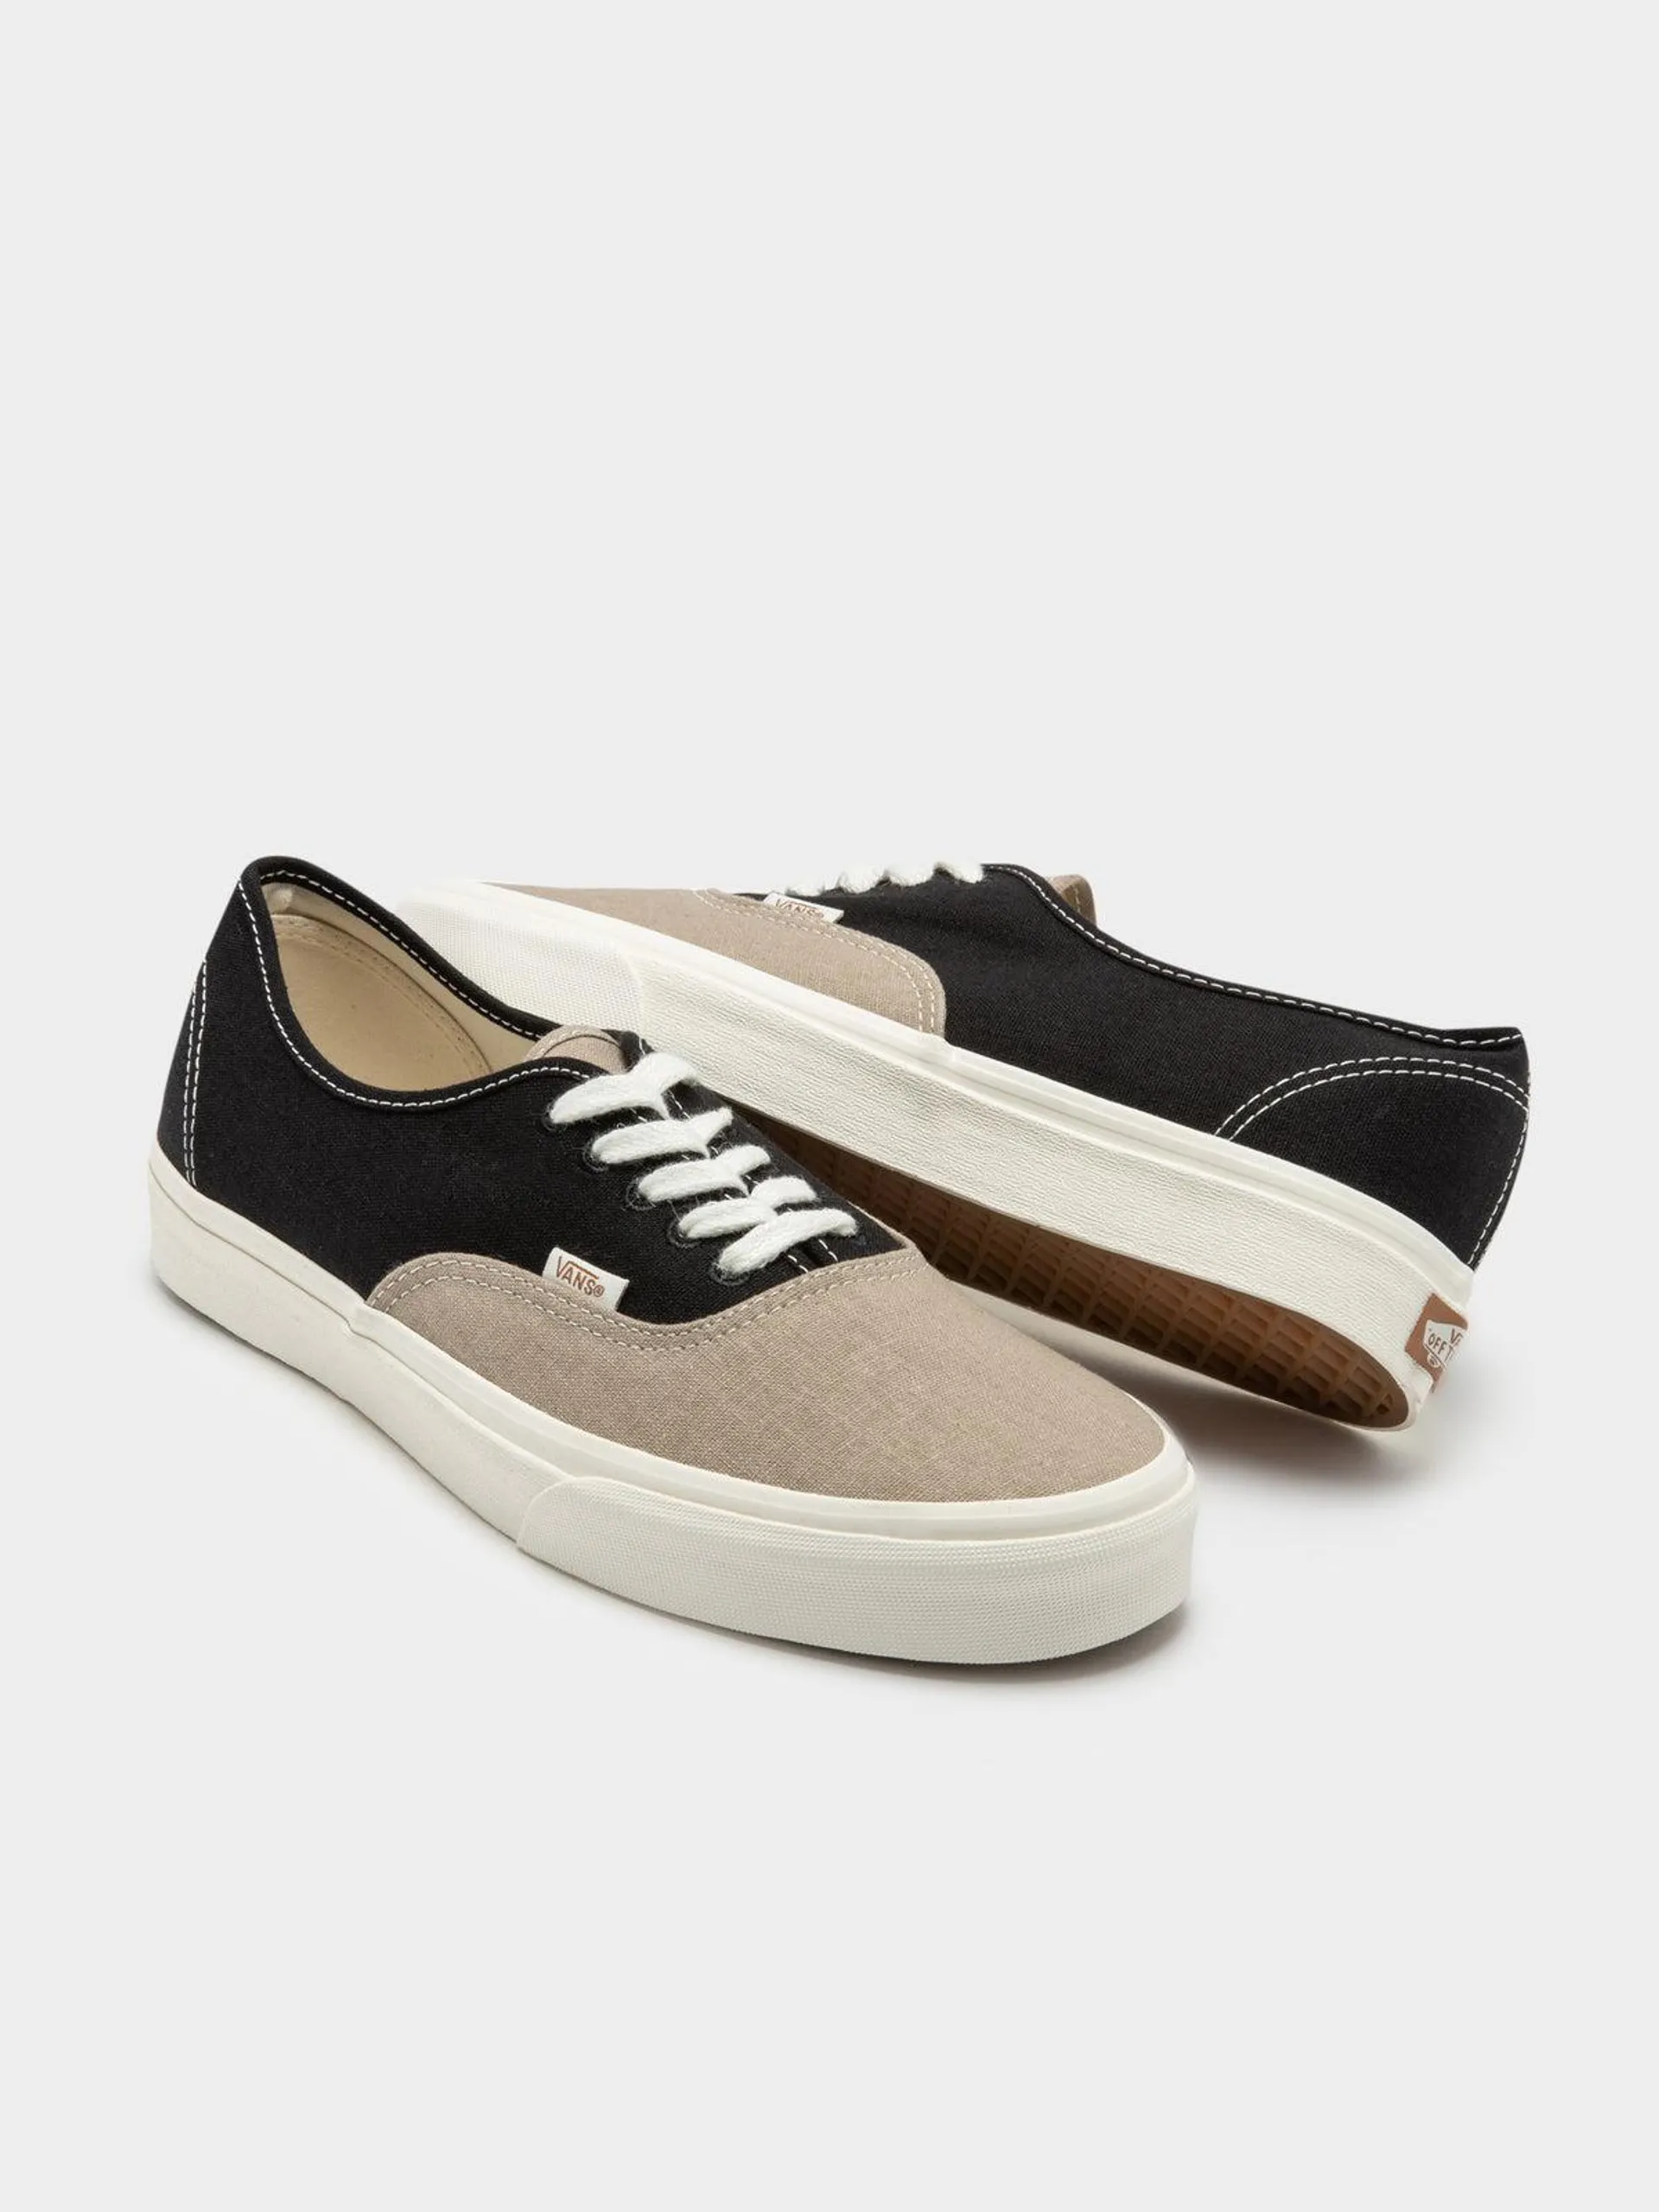 Unisex Authentic Eco Theory Sneakers in Black & Beige